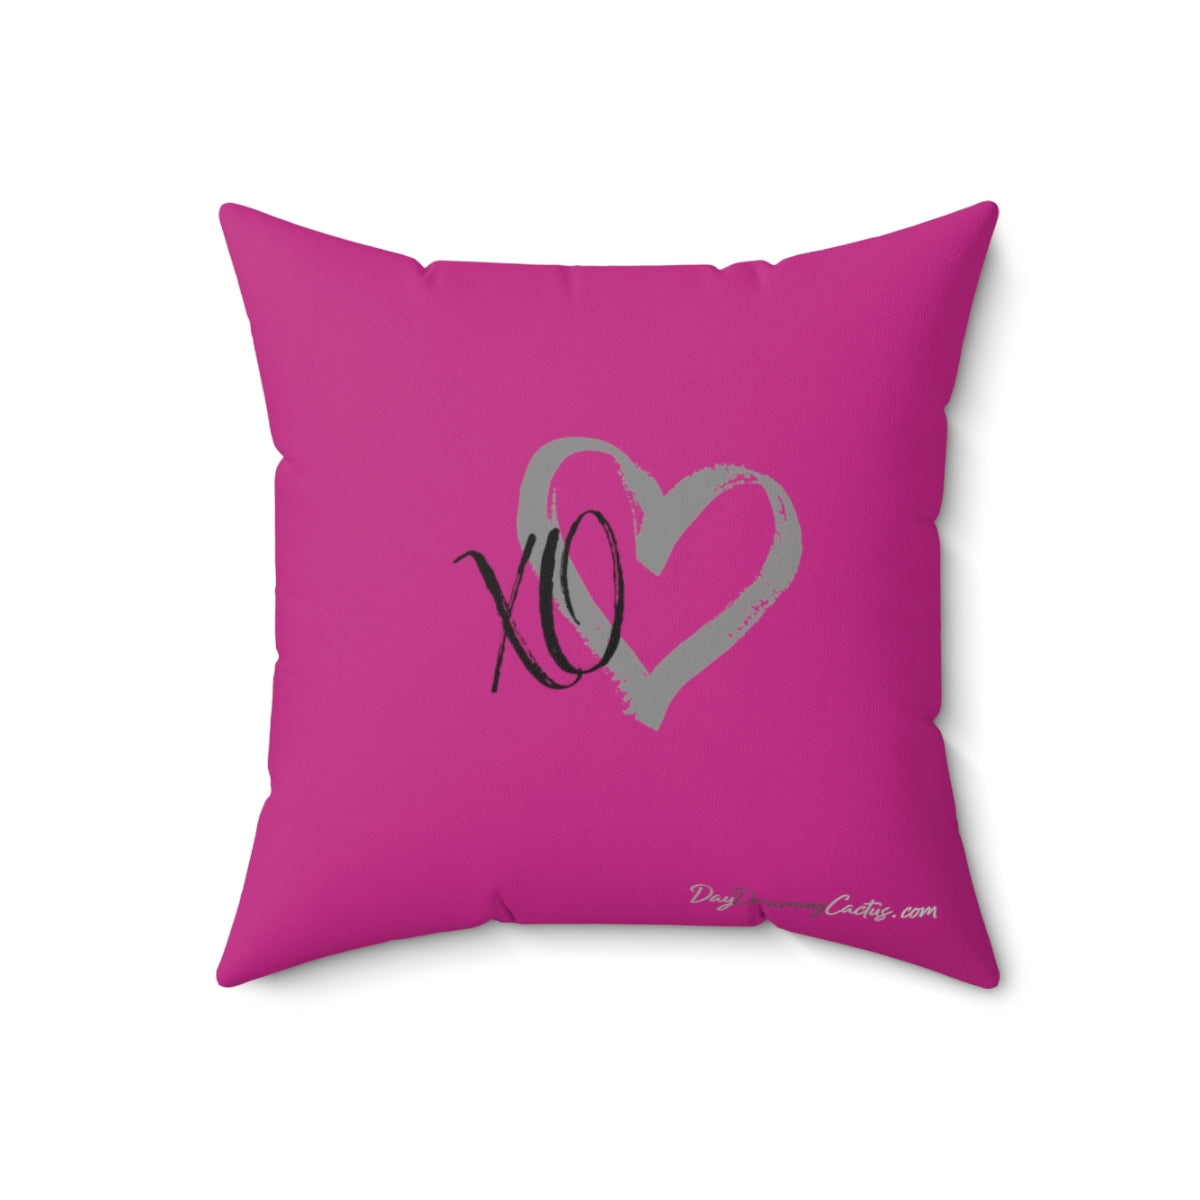 Pink Square Pillow Case - Live Love Bark - Home Decor Pillow Cover - Accent Pillow Cover